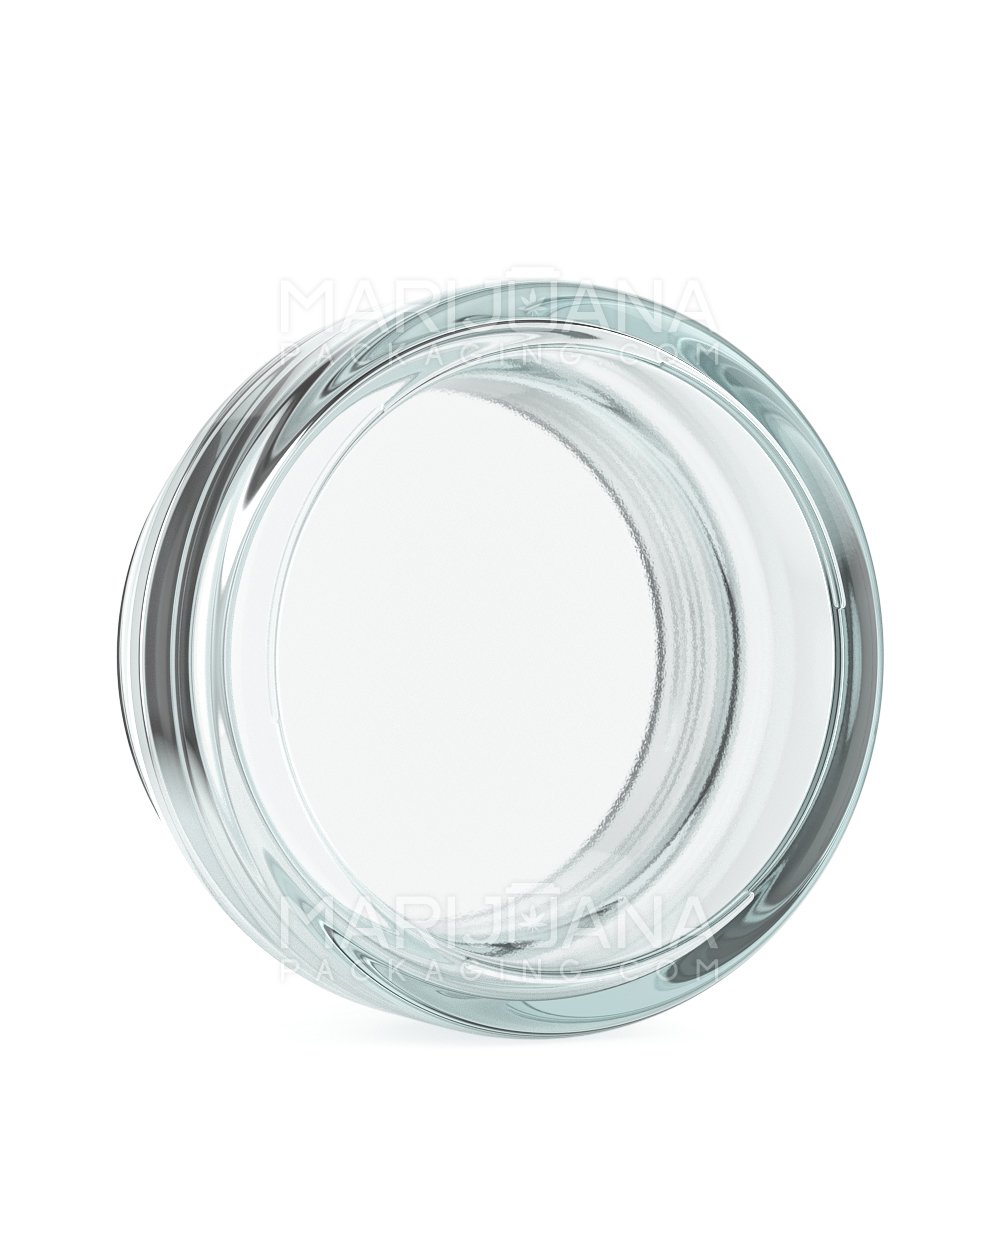 Straight Sided Clear Glass Jars | 63mm - 1.7oz | Sample - 4